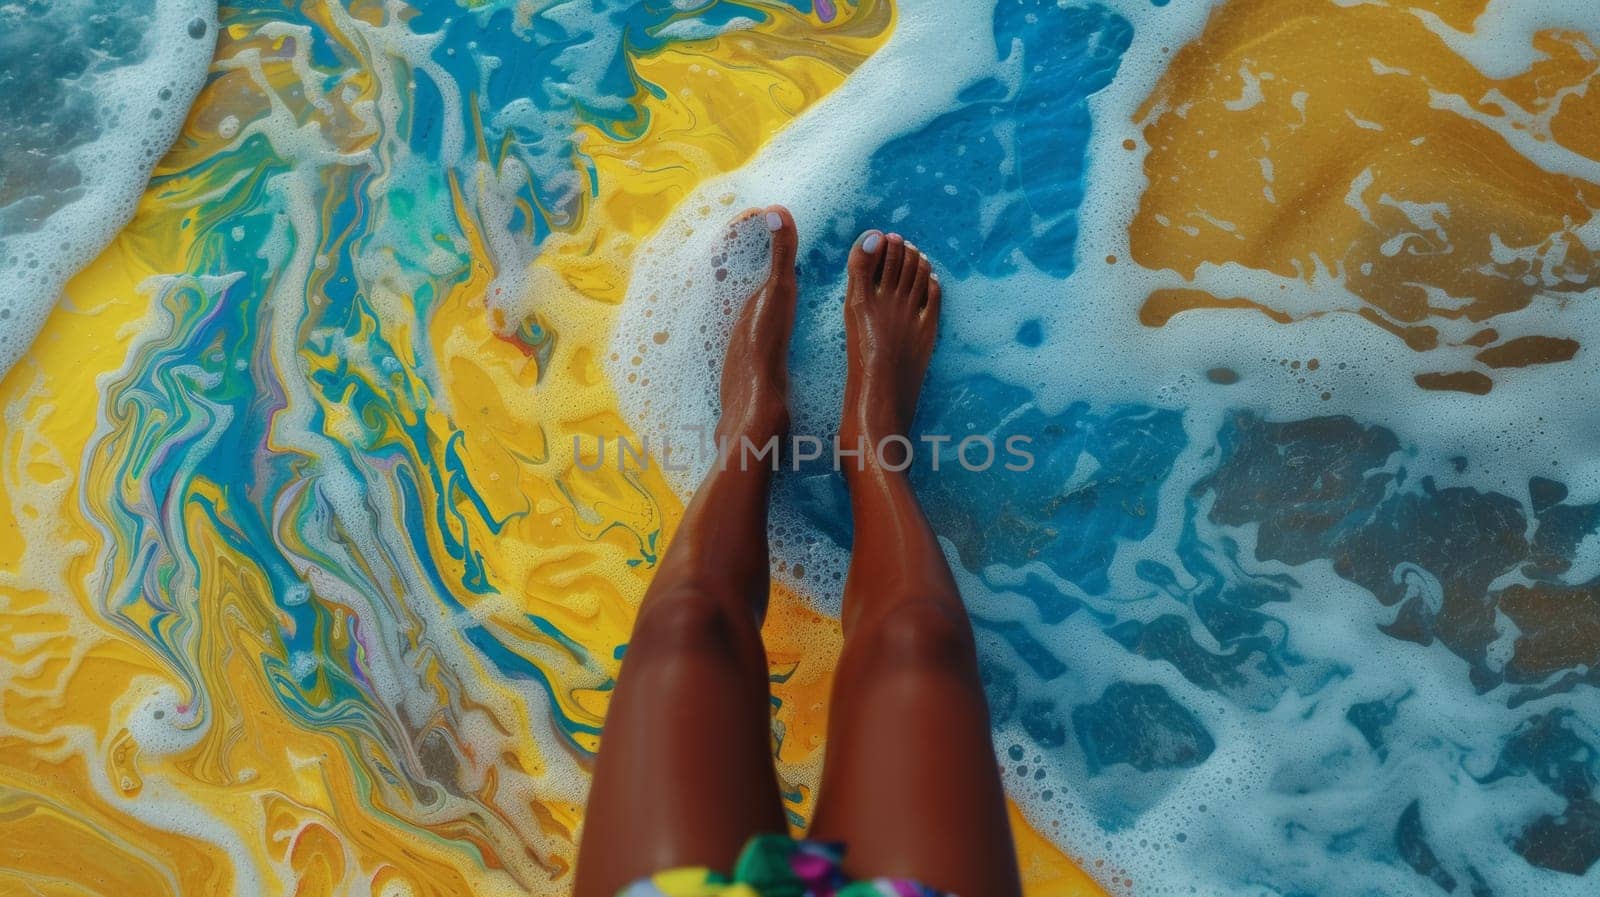 A person standing in a pool of colorful water with their feet